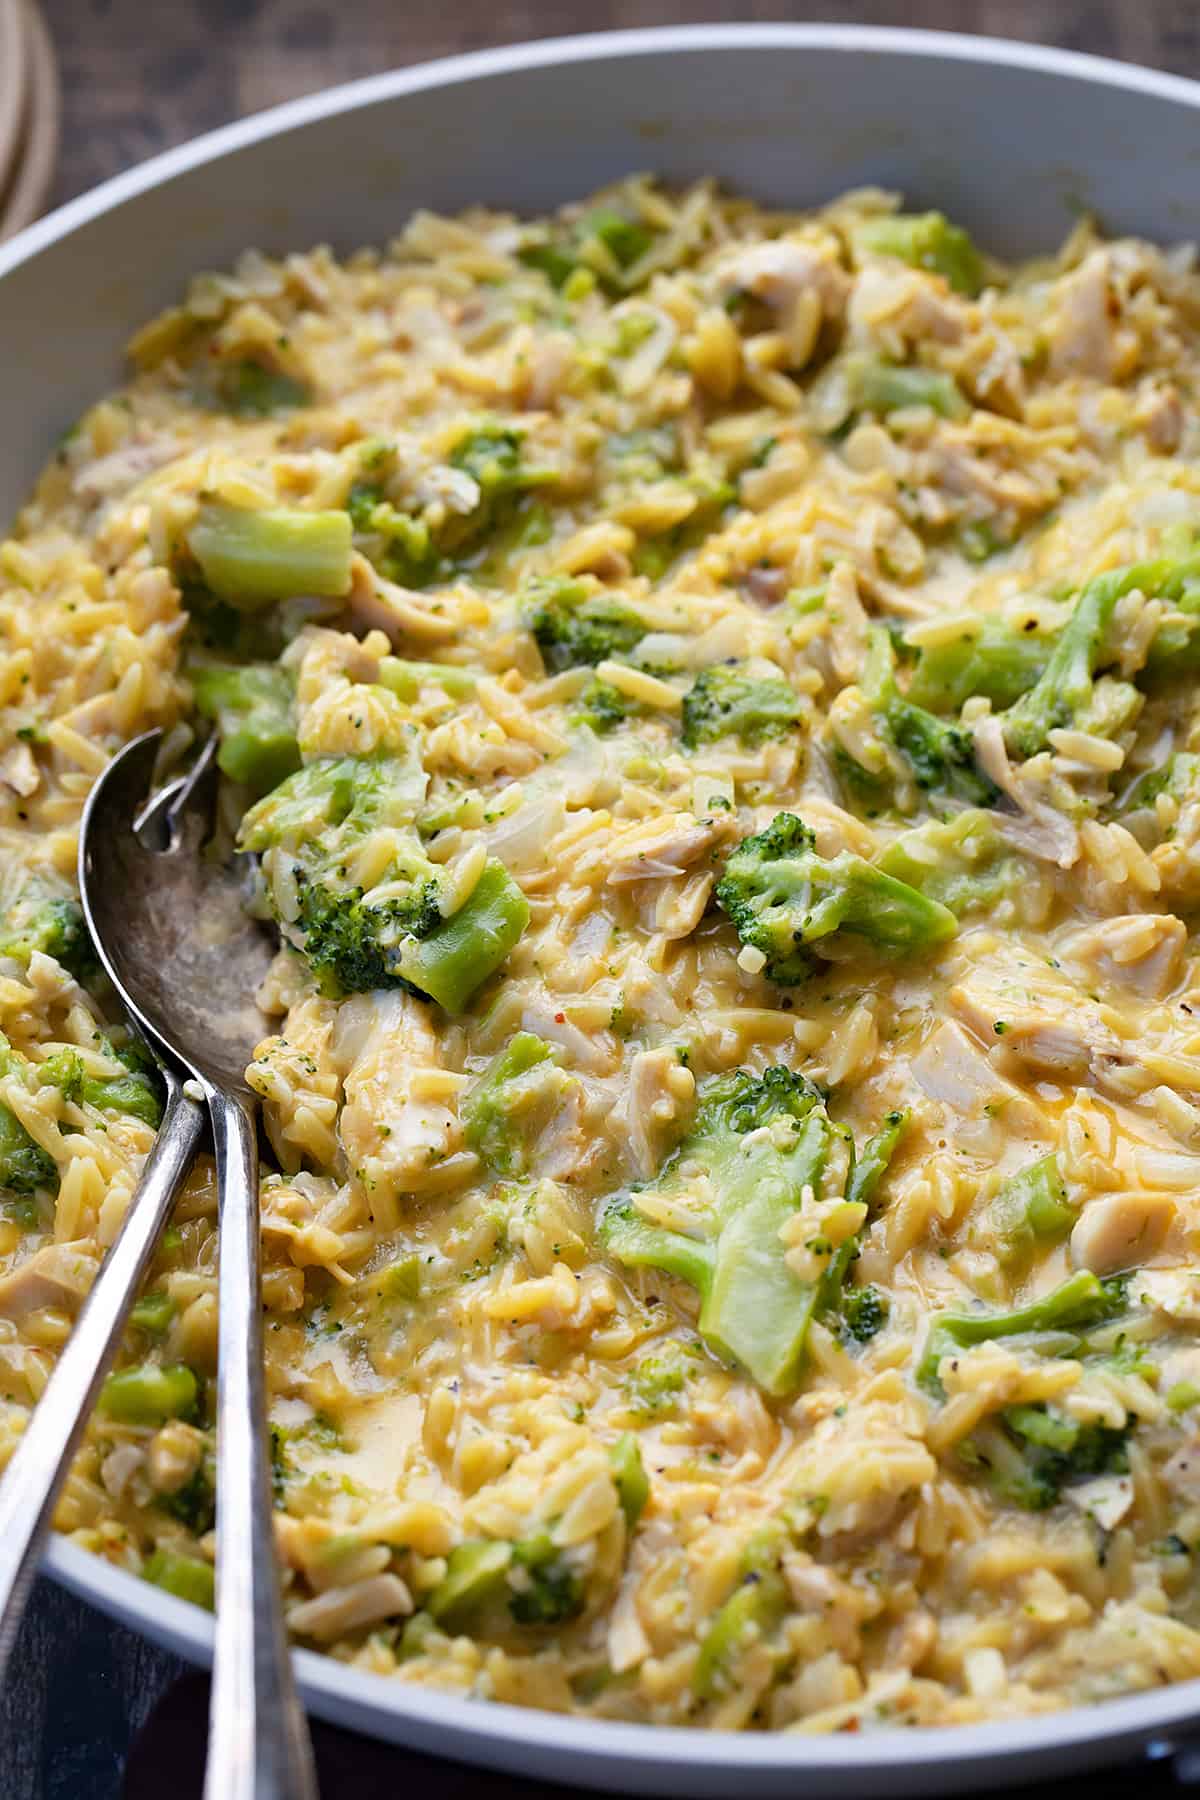 Spoons nestled into Creamy Chicken and Broccoli Orzo in a skillet.